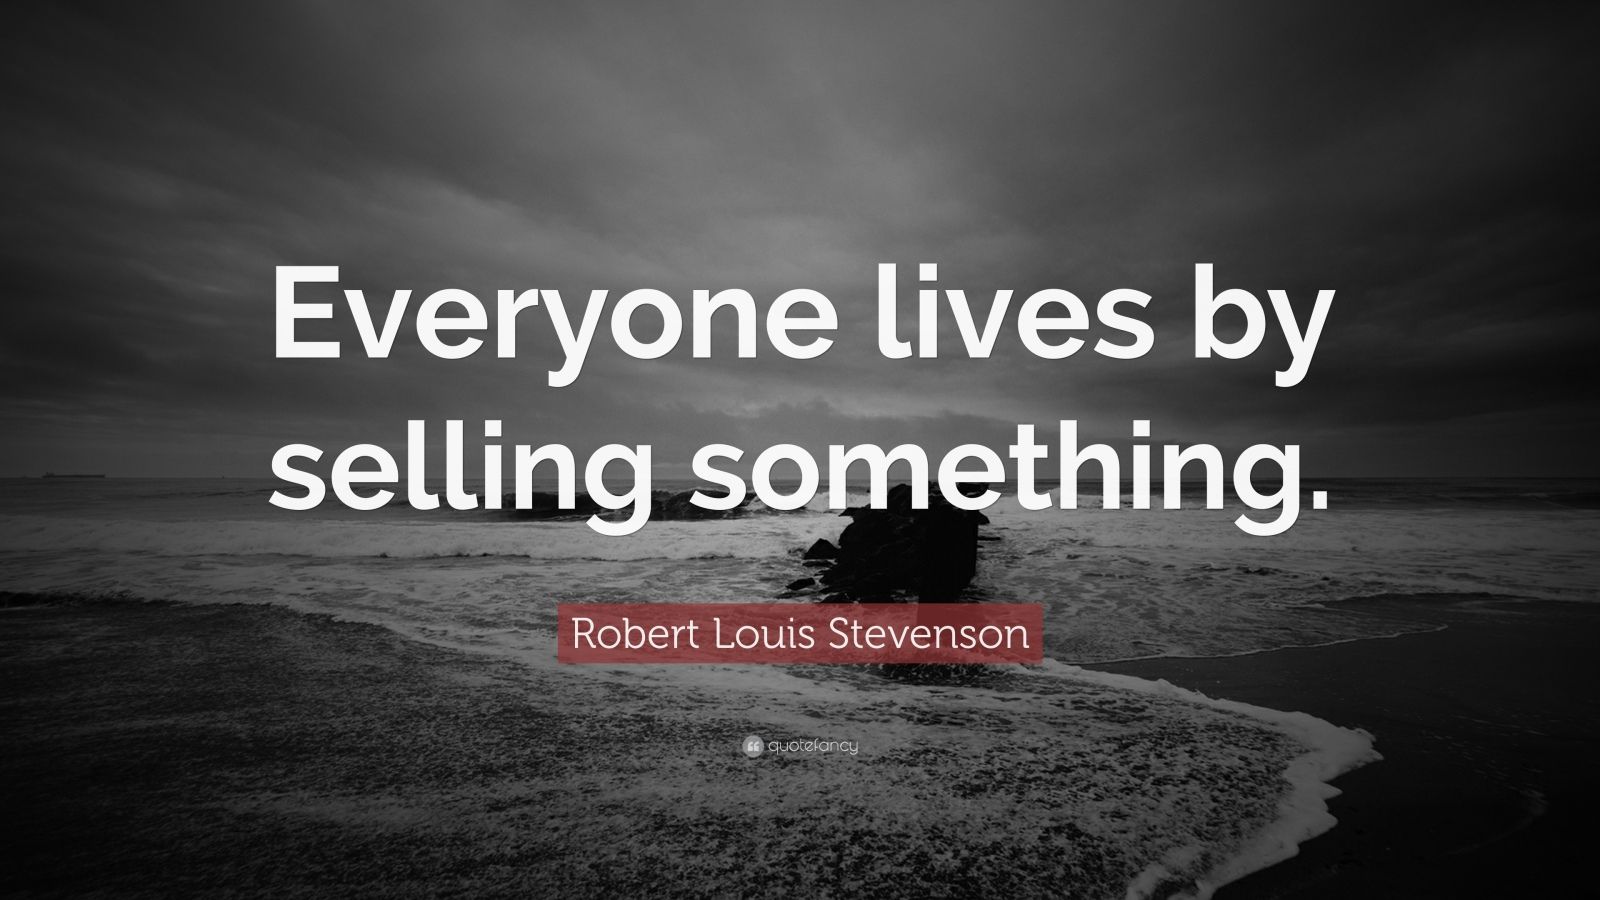 Robert Louis Stevenson Quote “Everyone lives by selling